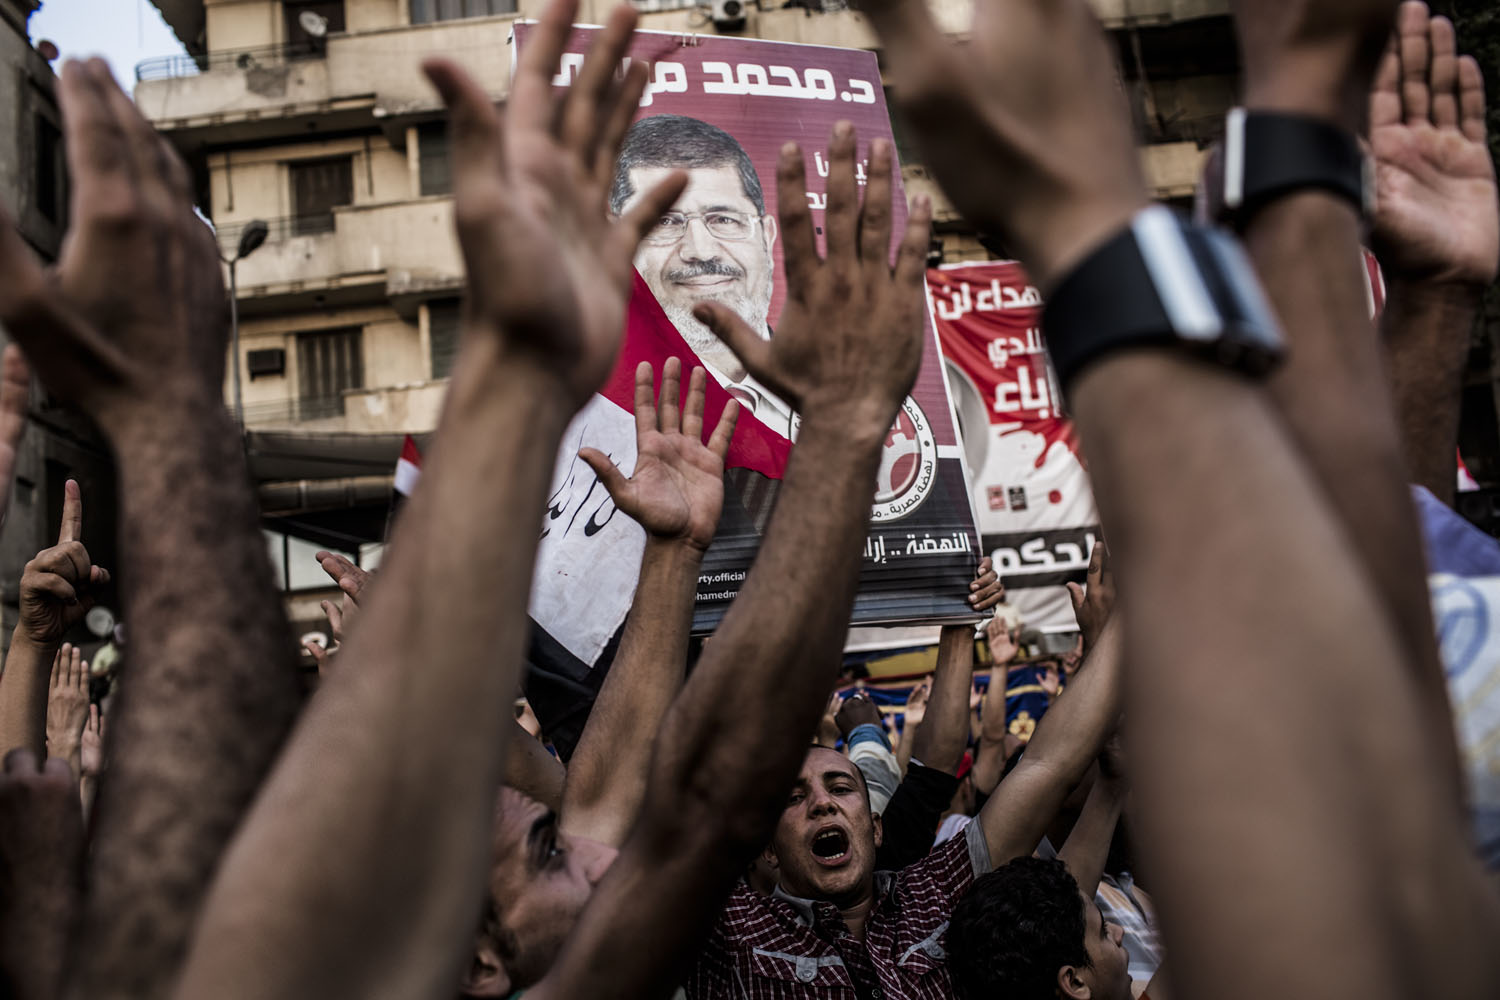 June 23, 2012, Cairo. Supporters of Mohamed Morsy protest against Egypt's military rulers in Tahrir Square.